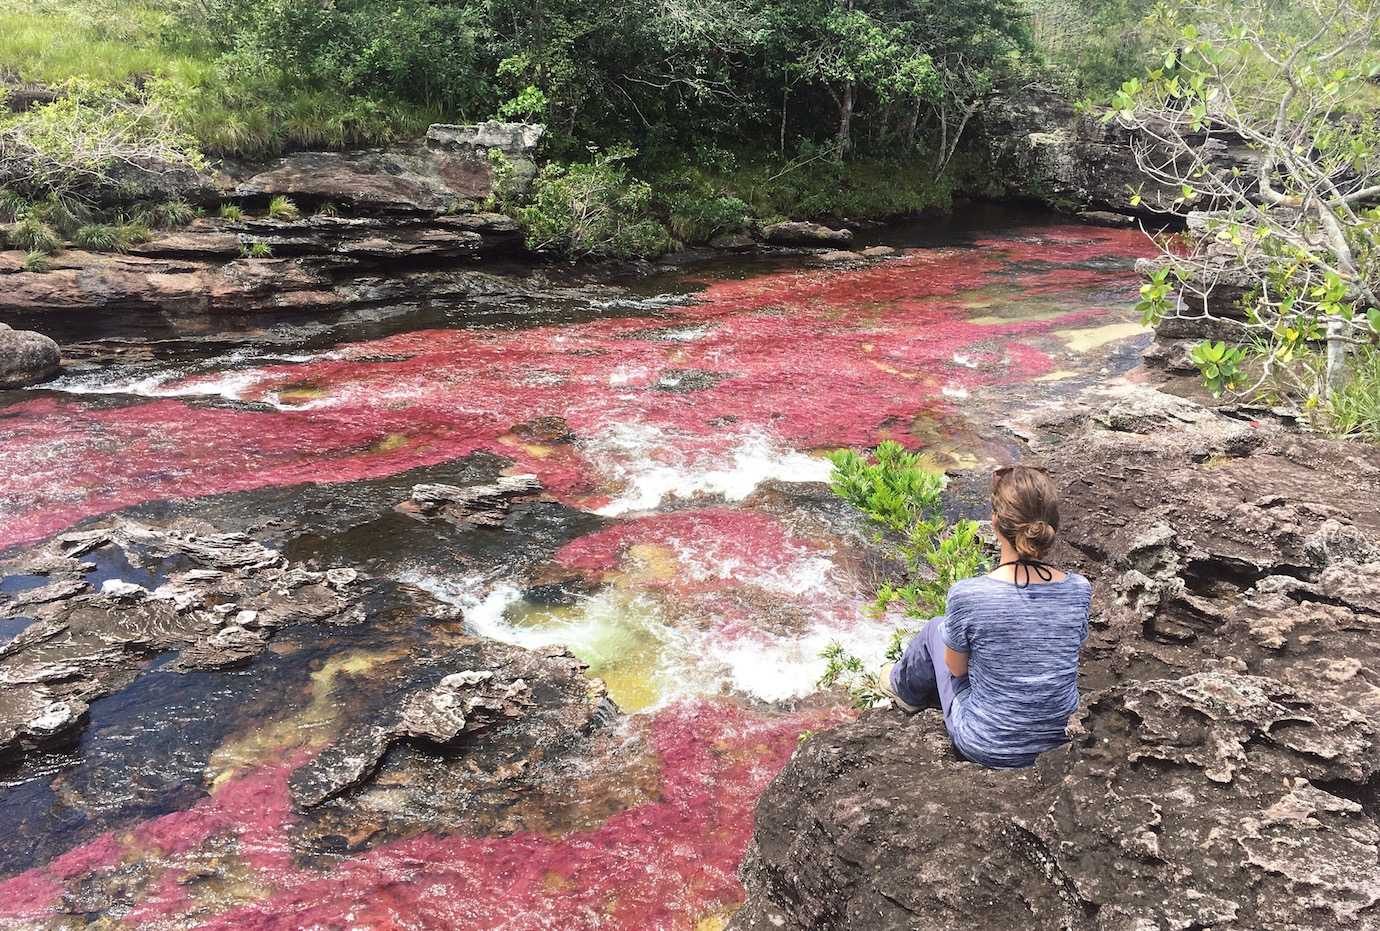 How to get to Caño Cristales by bus